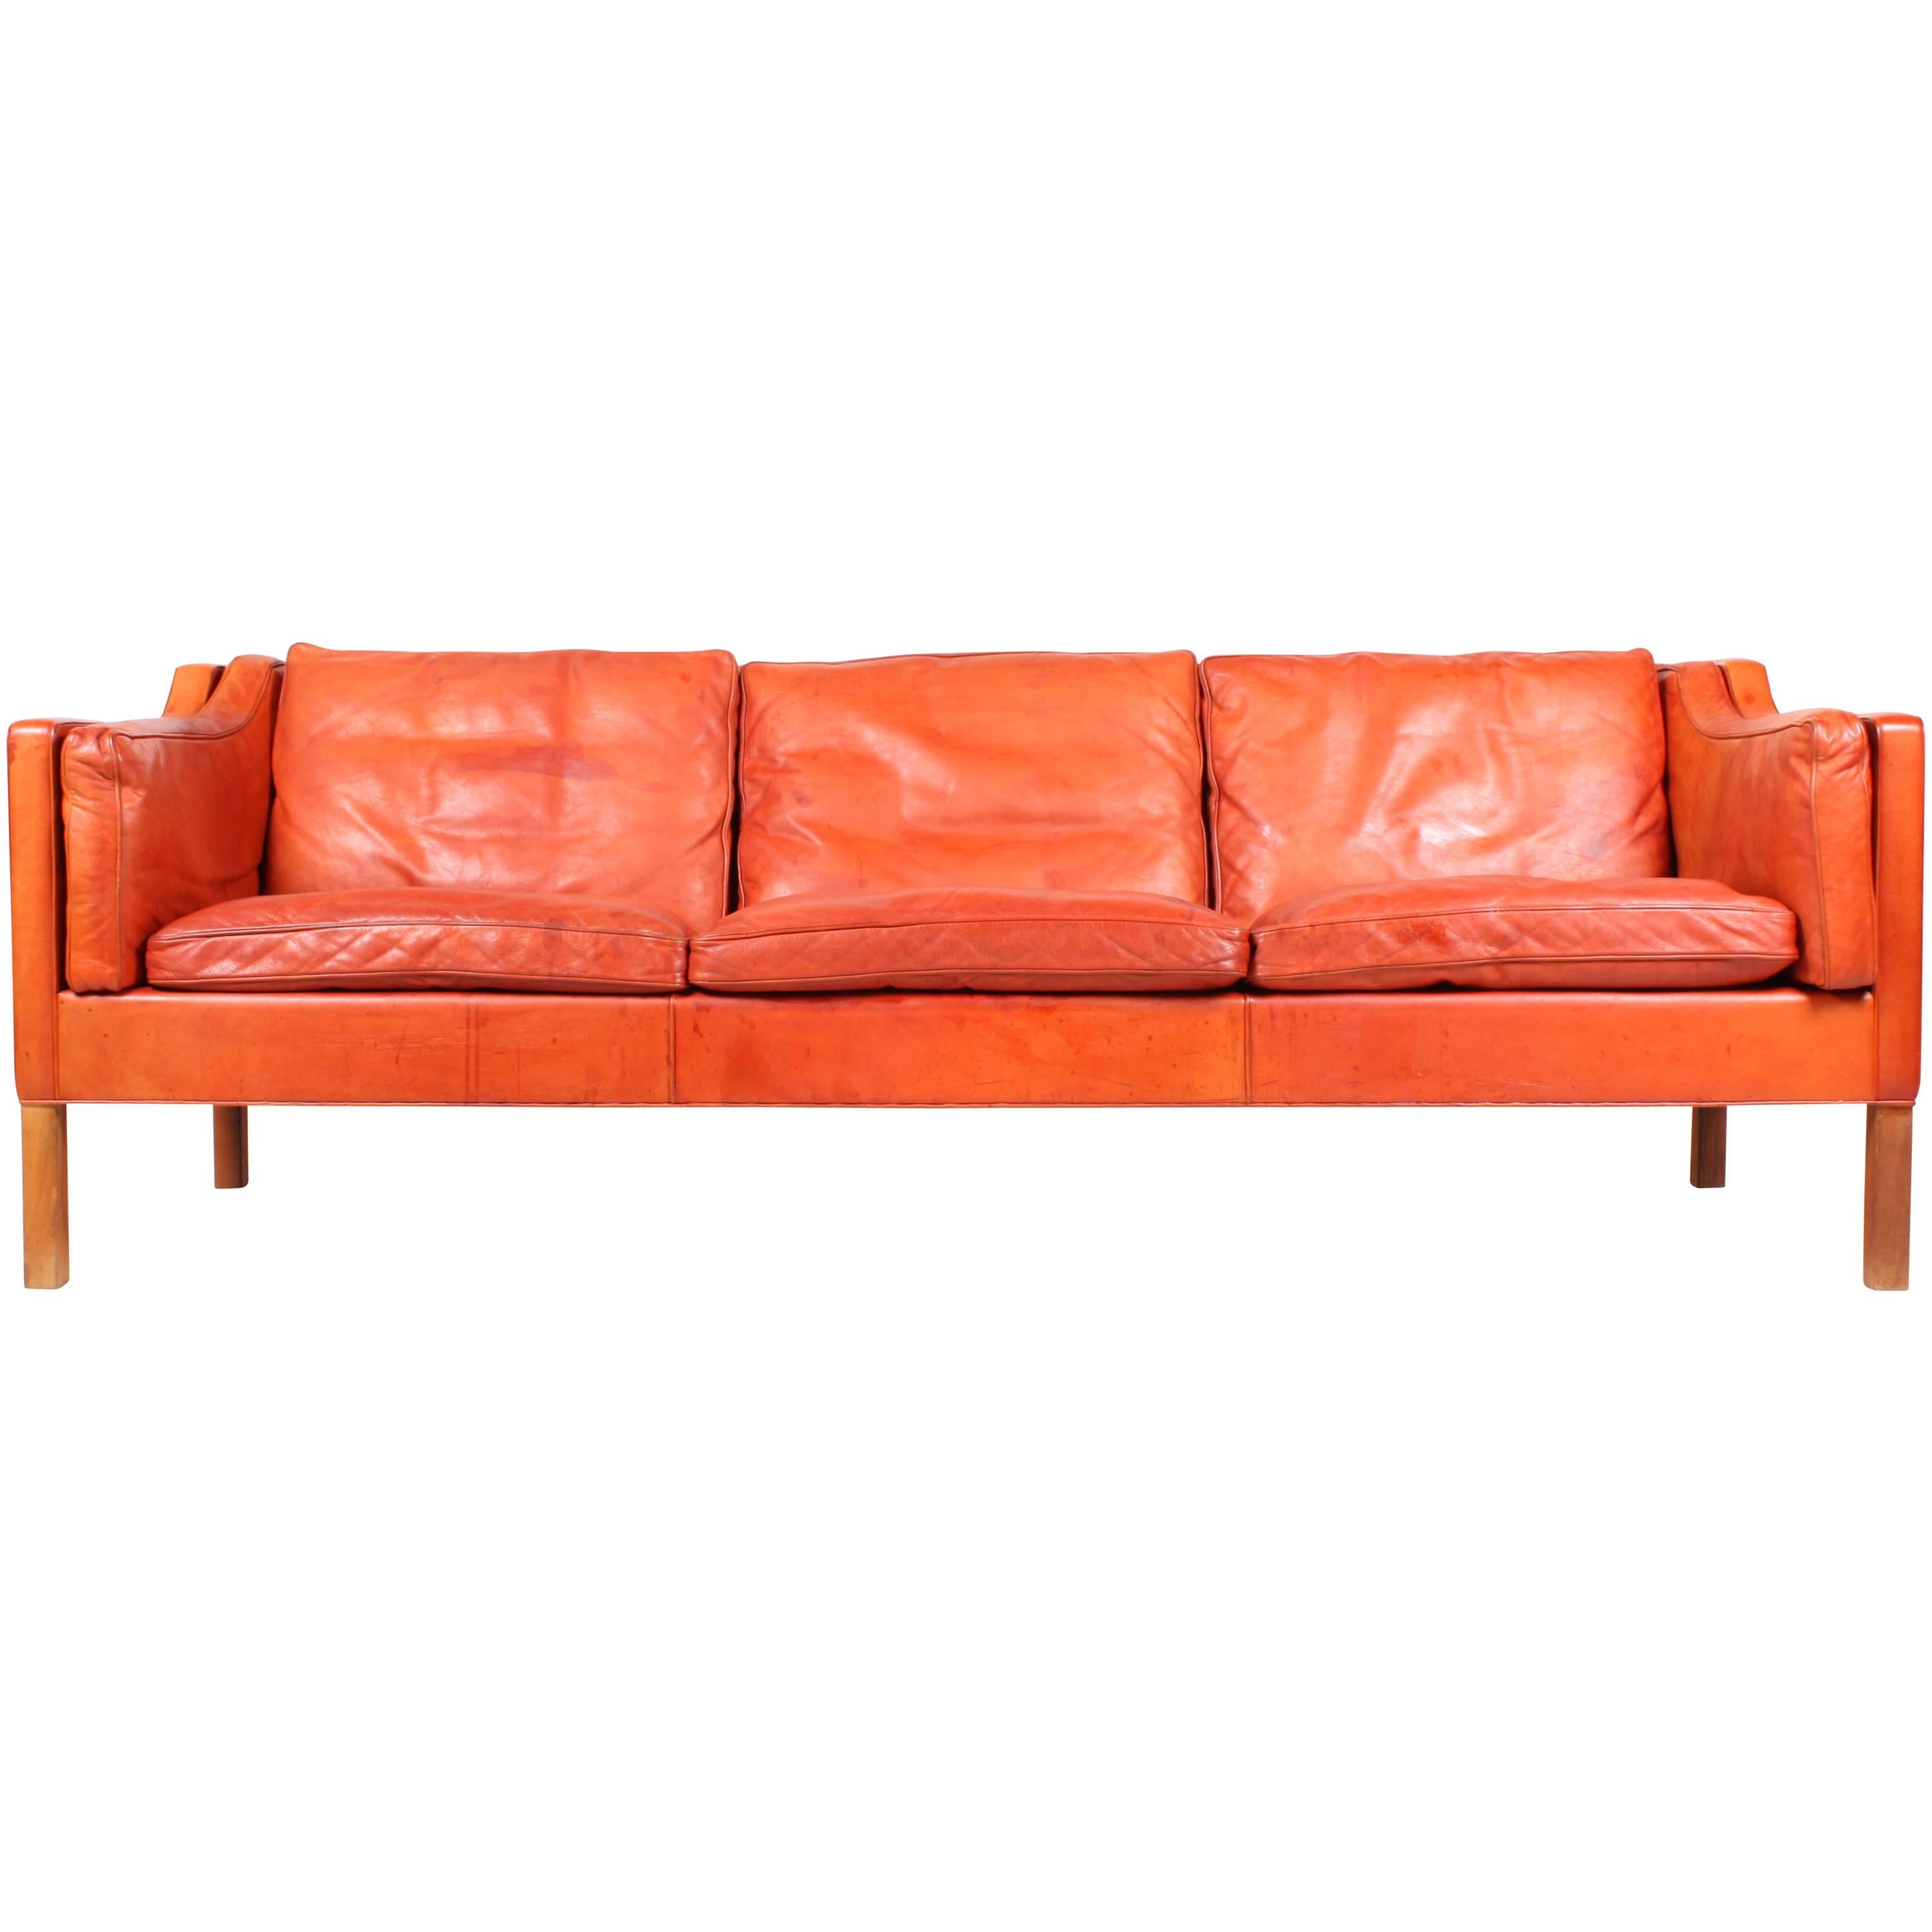 Børge Mogensen Sofa in Patinated Leather